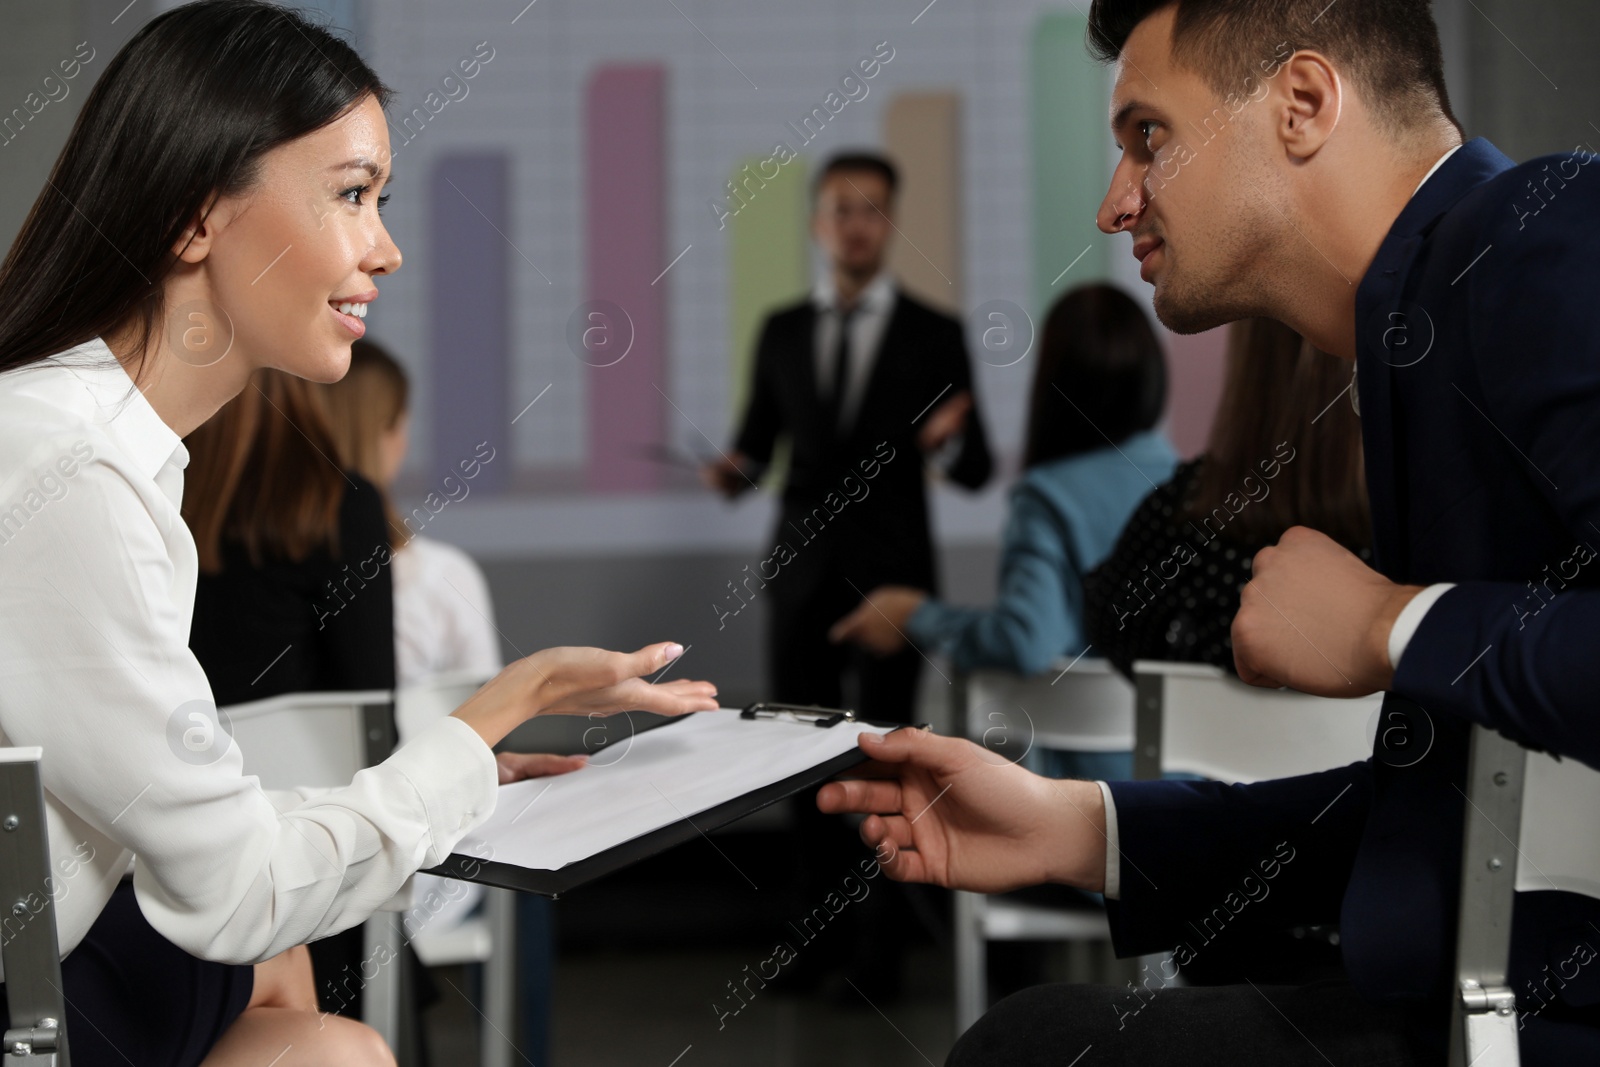 Photo of Young people having business training in conference room with projection screen